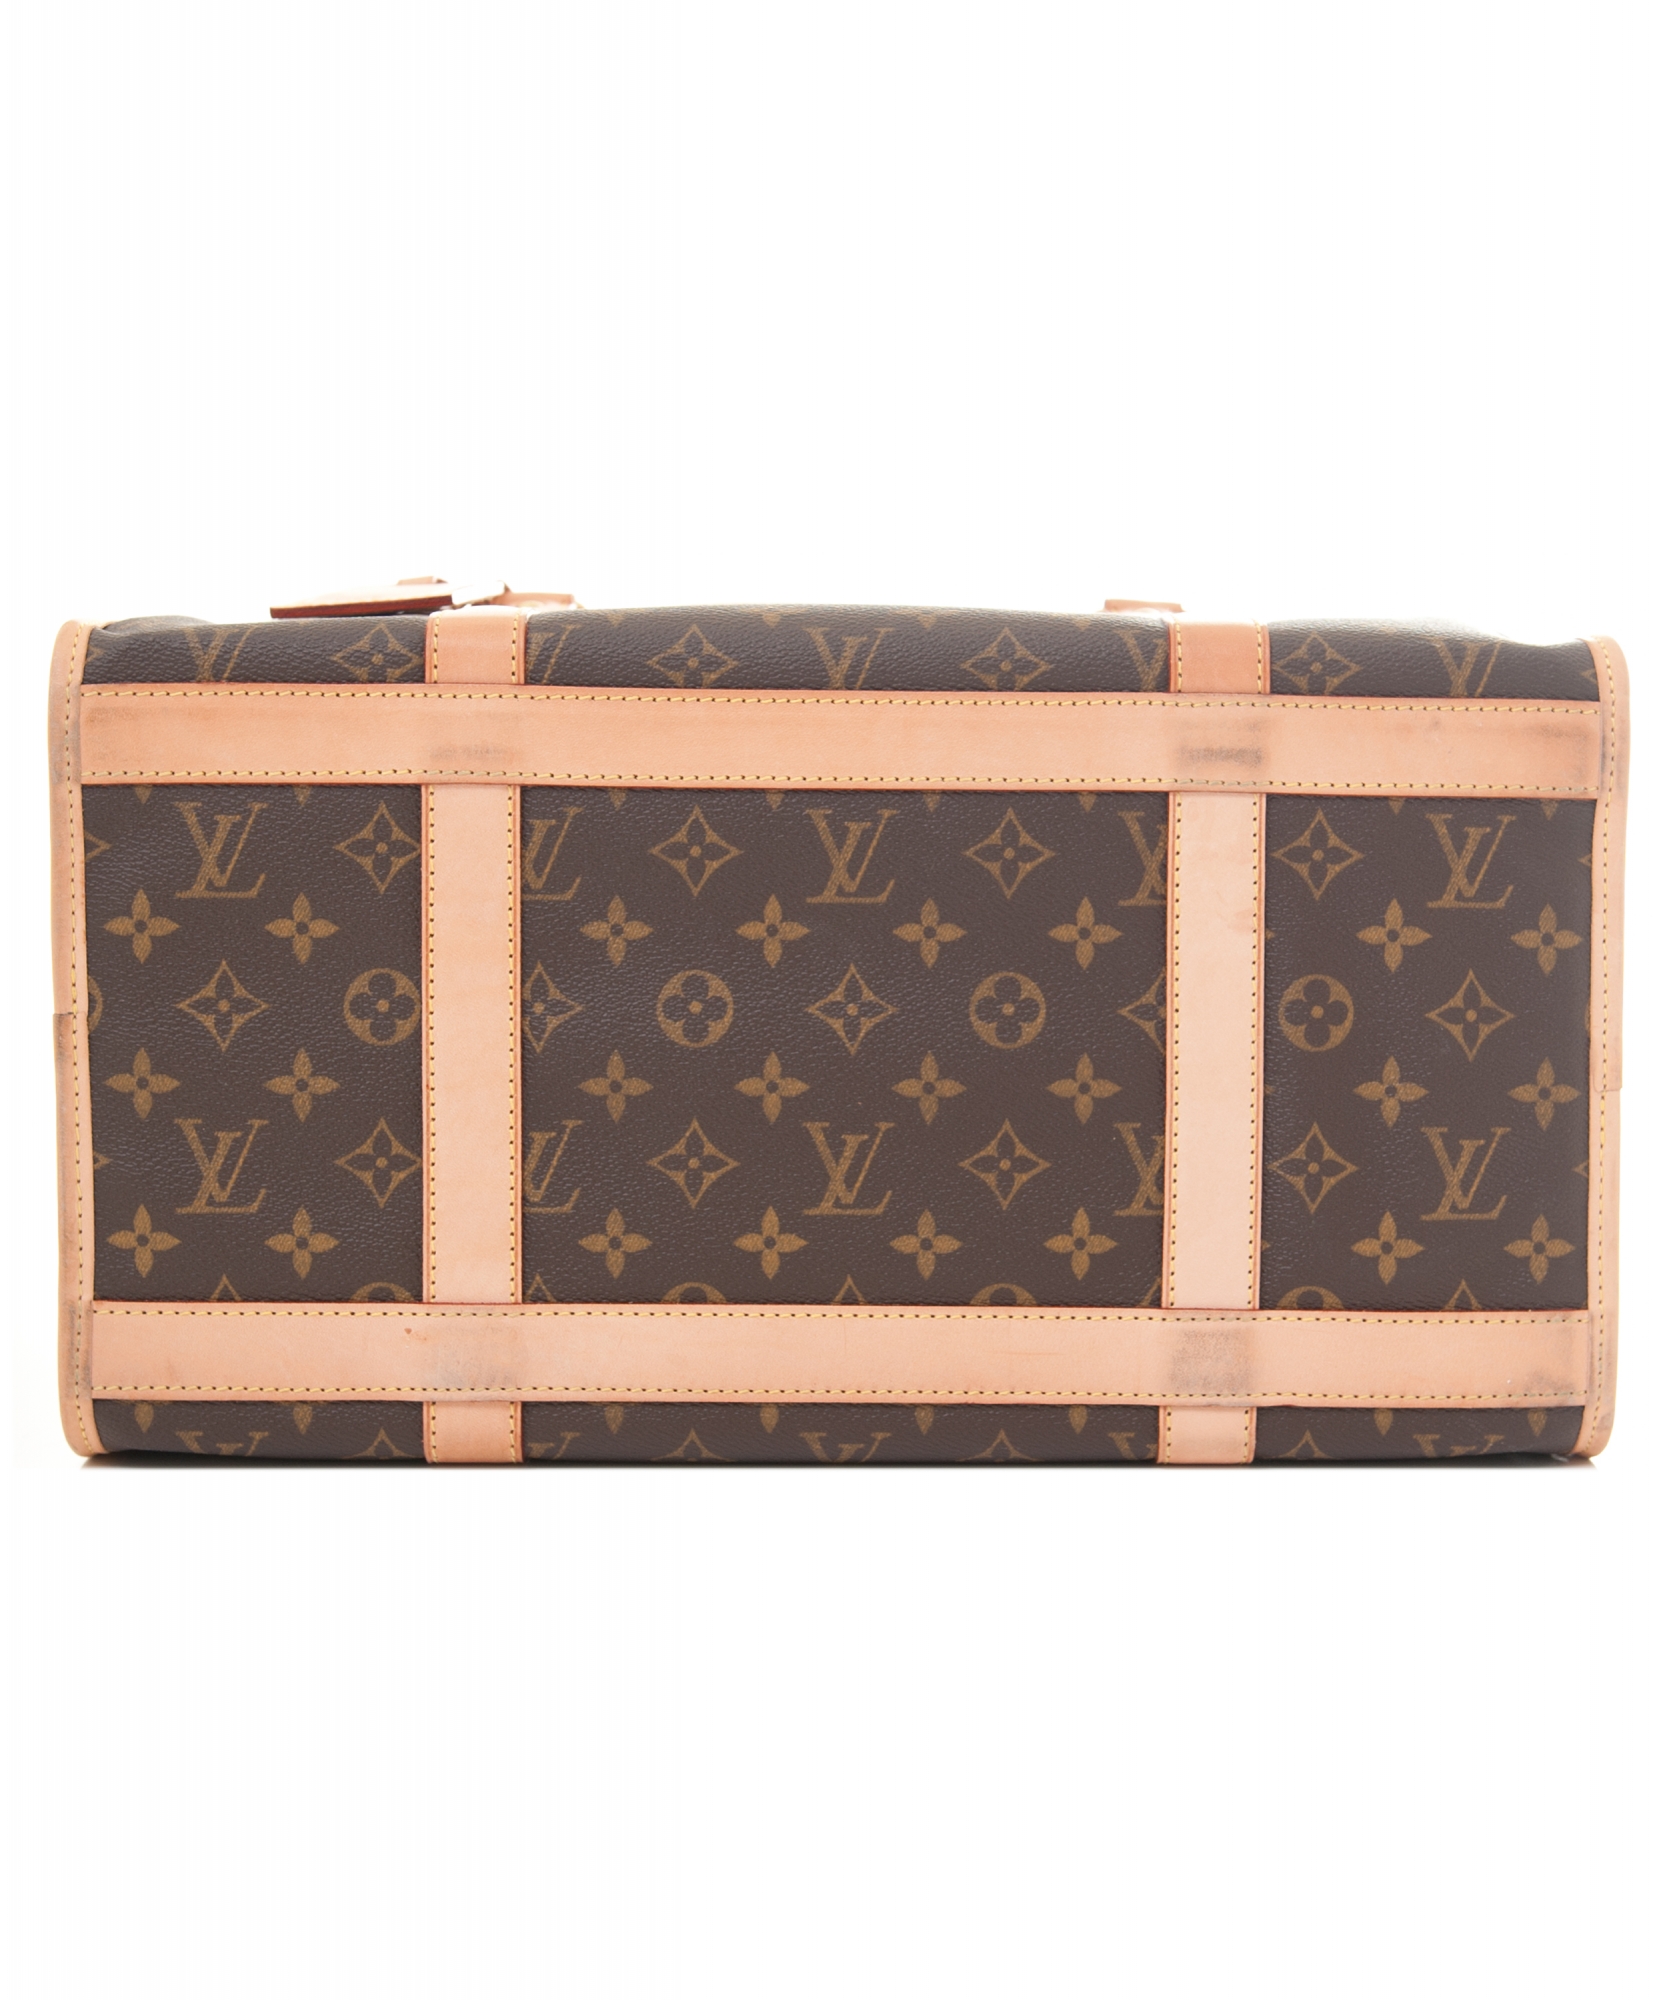 Louis Vuitton Fabric Roll | Confederated Tribes of the Umatilla Indian Reservation